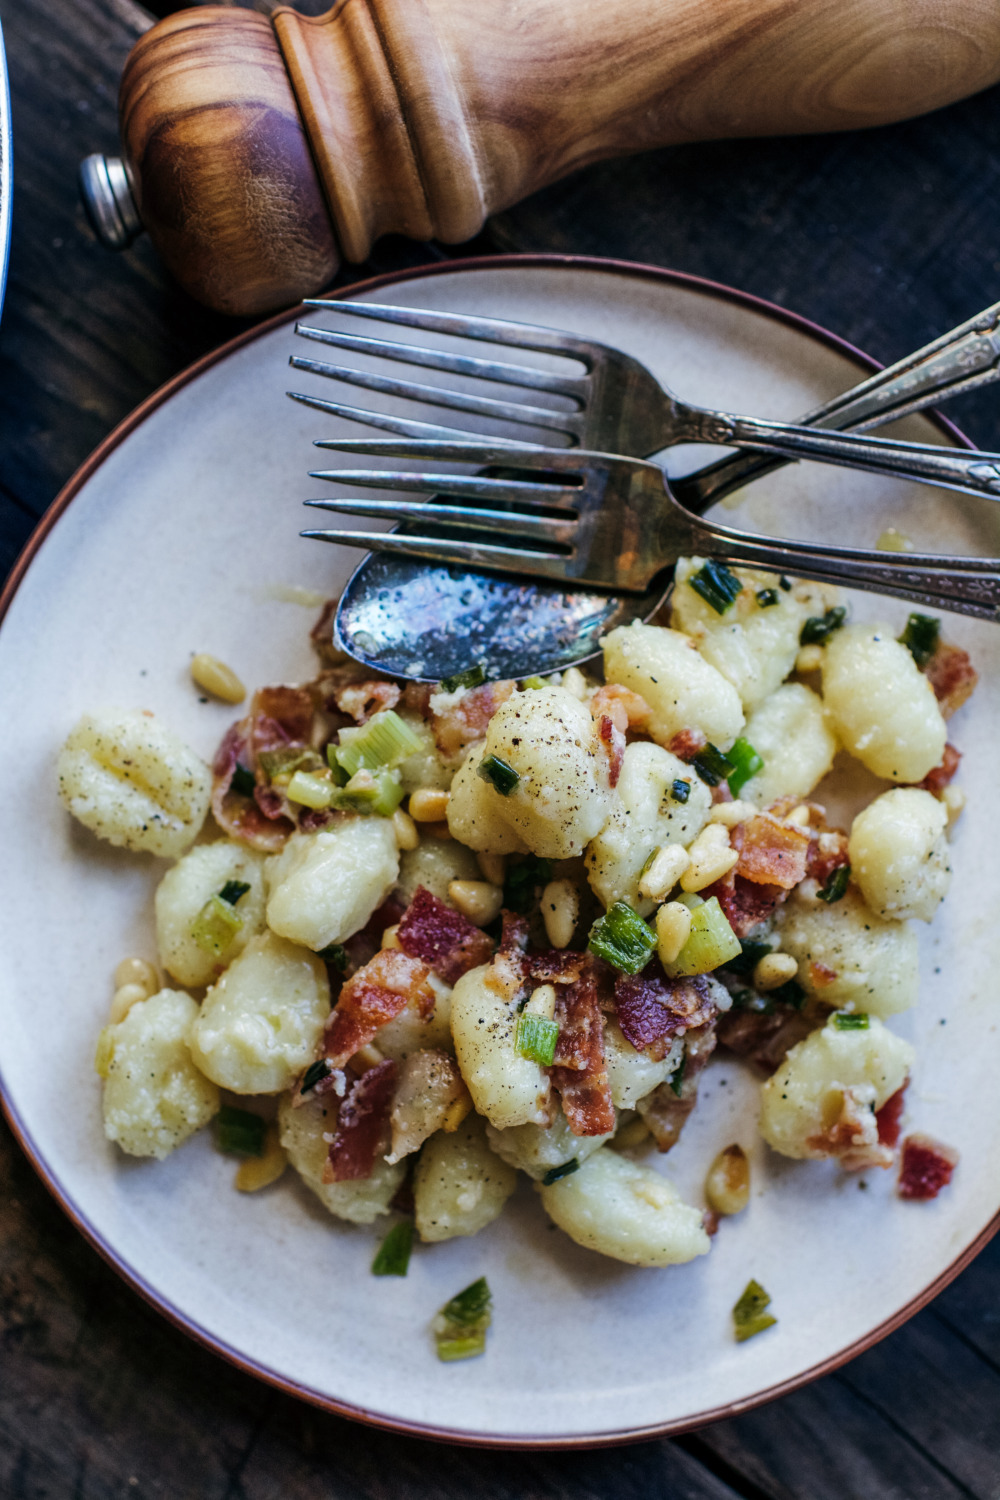 Gnocchi with Crispy Bacon, Scallions, Toasted Pine Nuts and Parmigiano